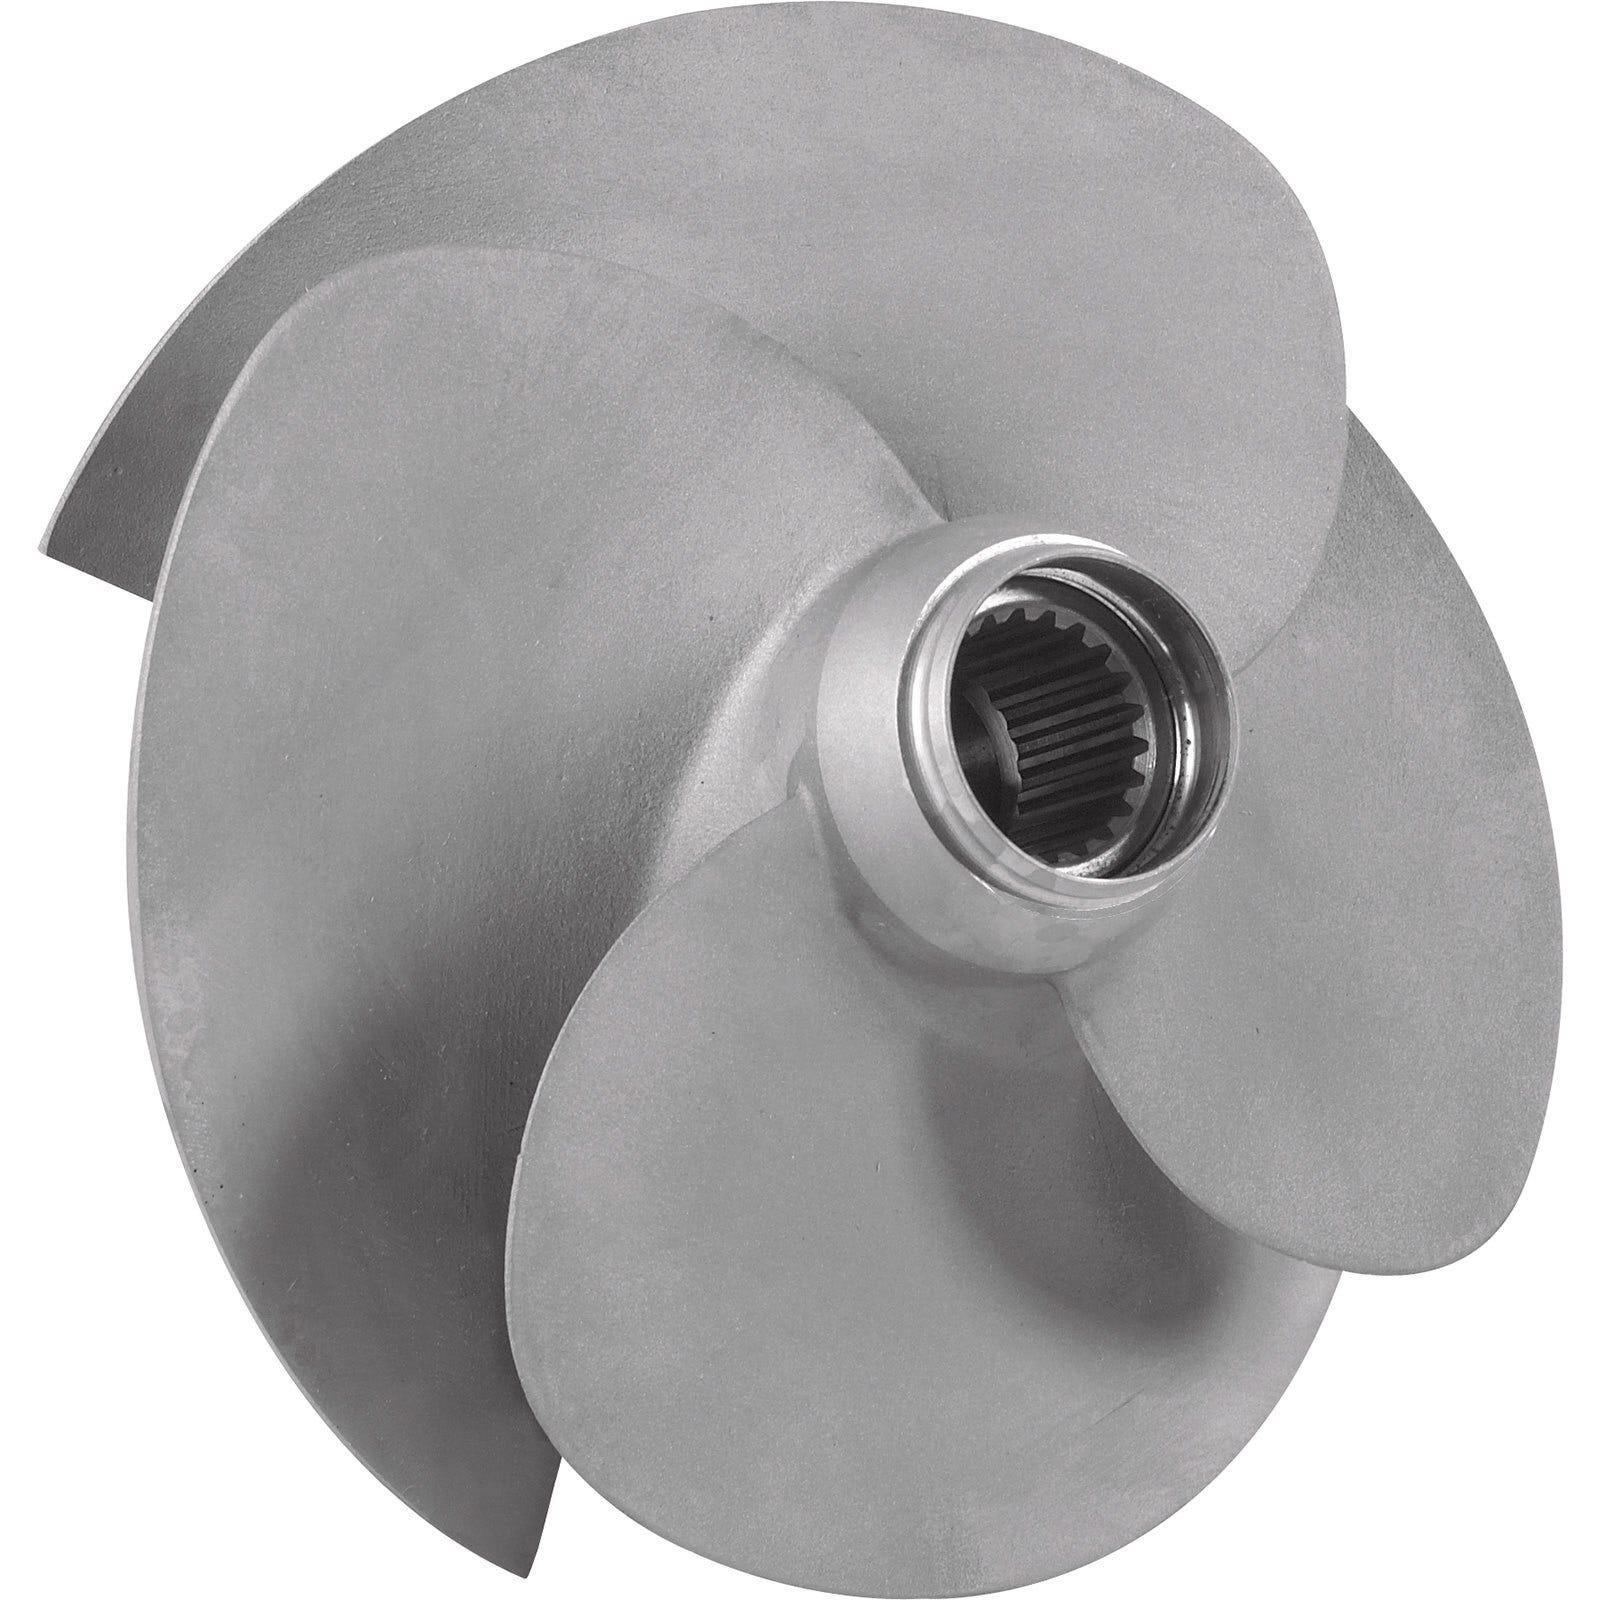 GTX 155 and WAKE 155 (2018-2019) Impeller - Factory Recreation